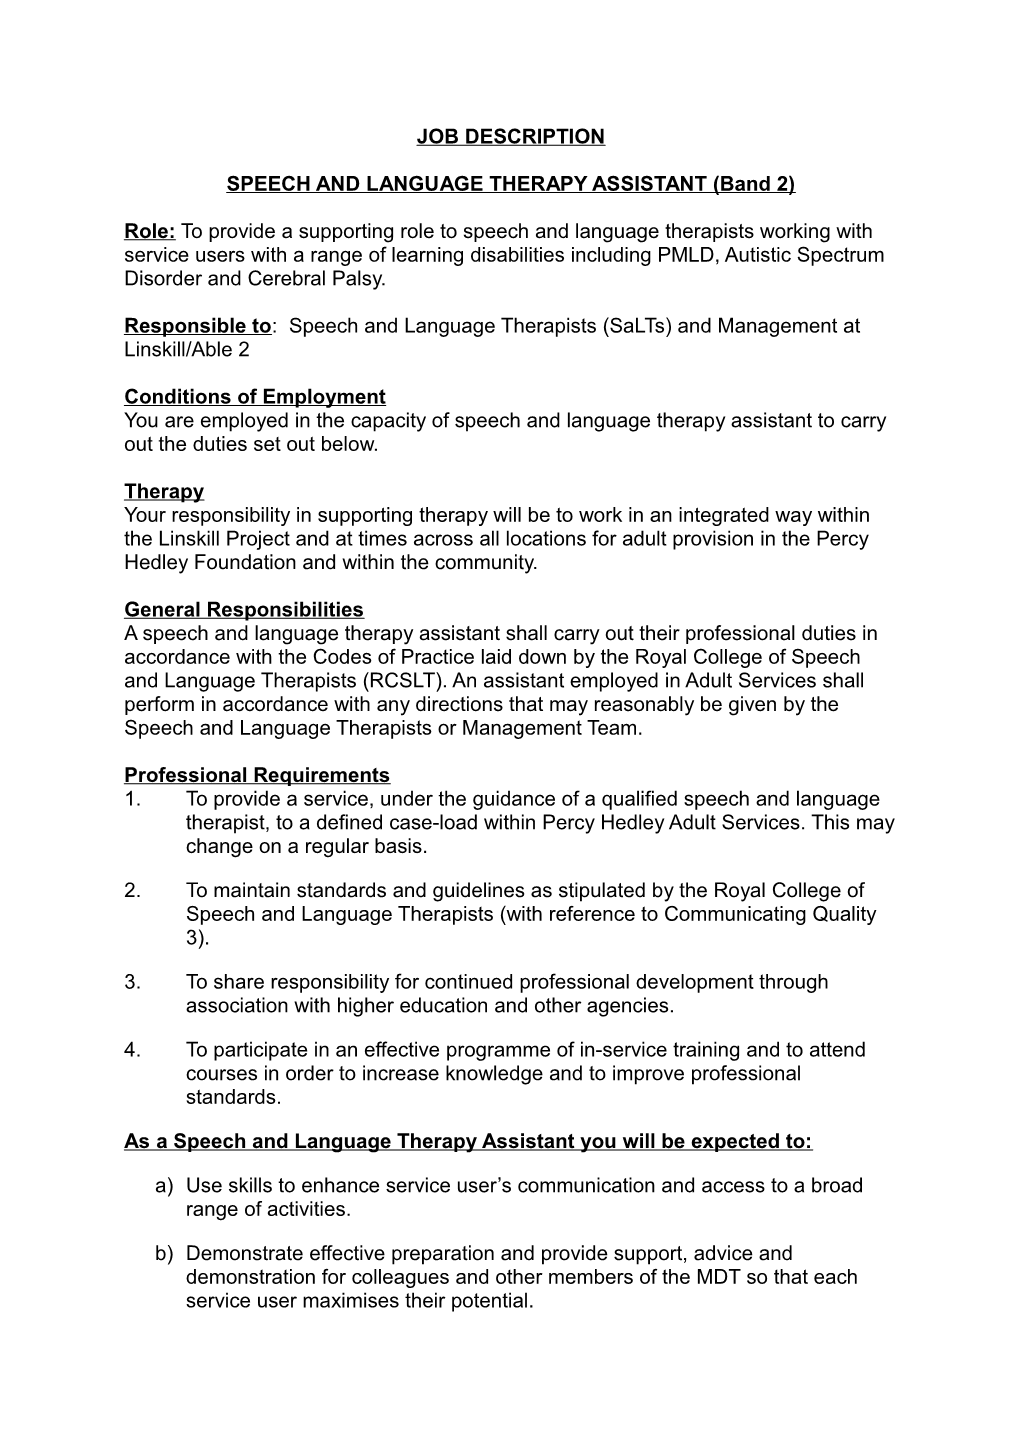 SPEECH and LANGUAGE THERAPY ASSISTANT (Band 2)